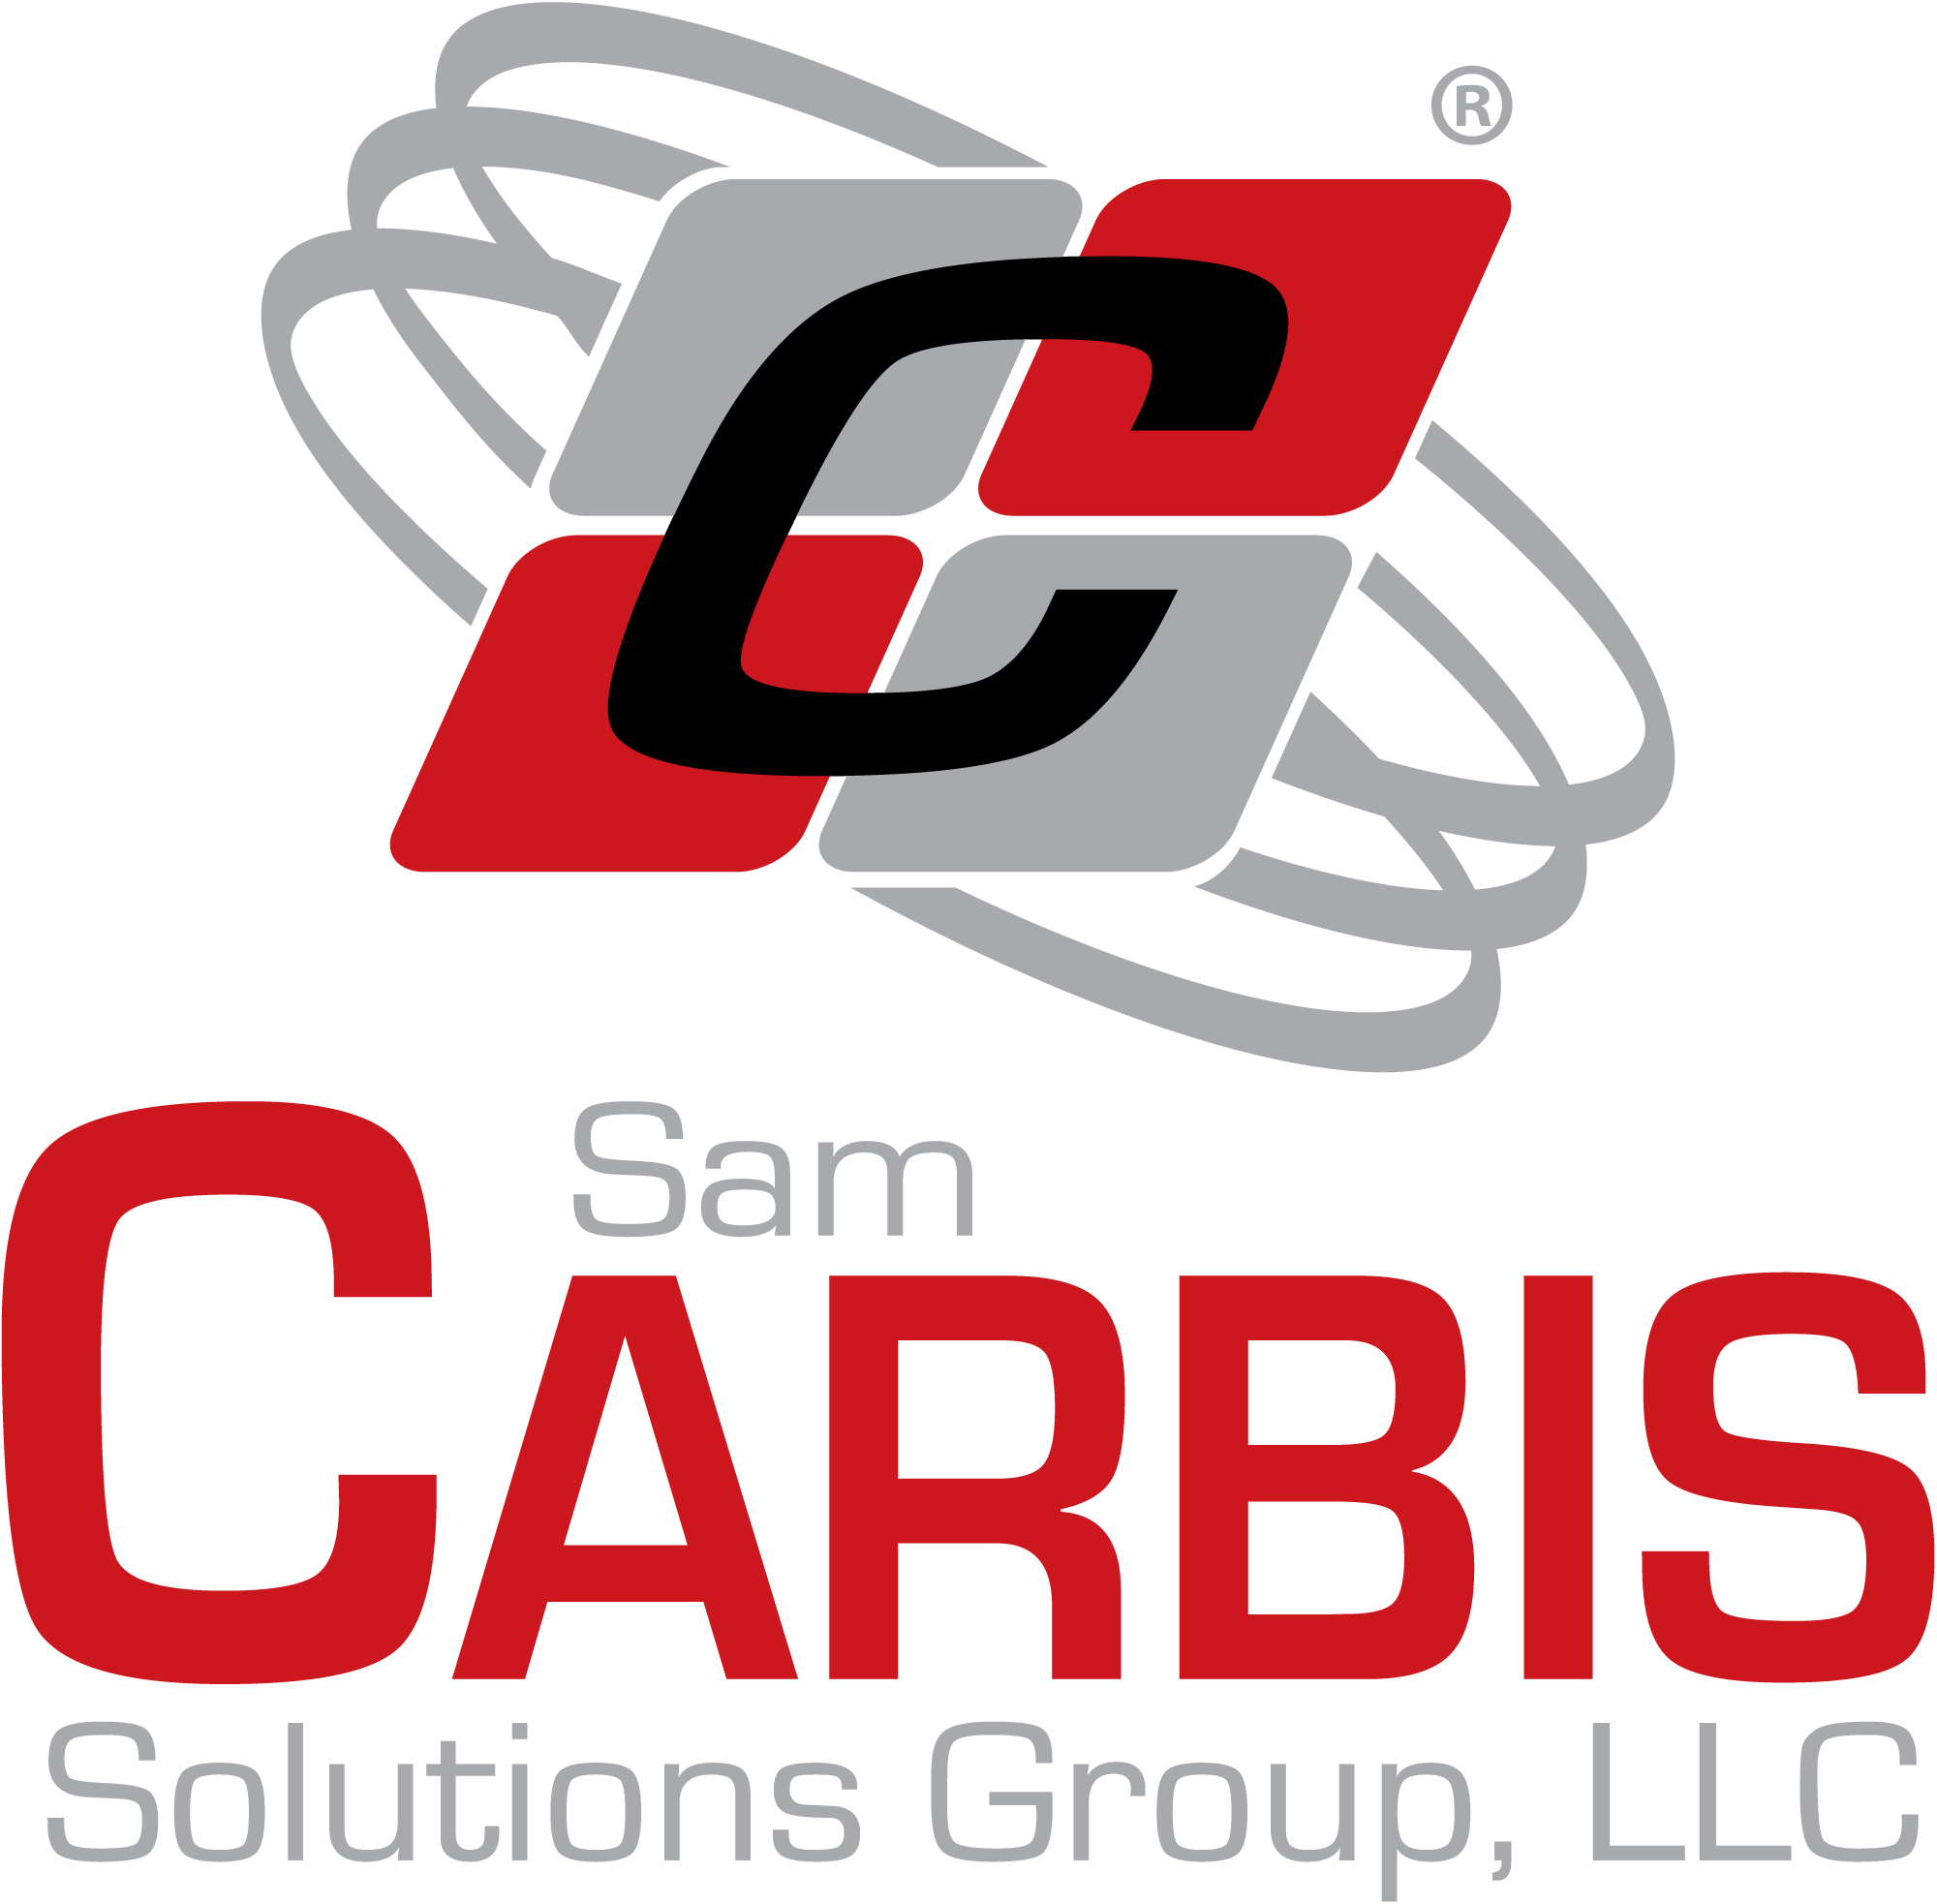 Sam Carbis Solutions Group